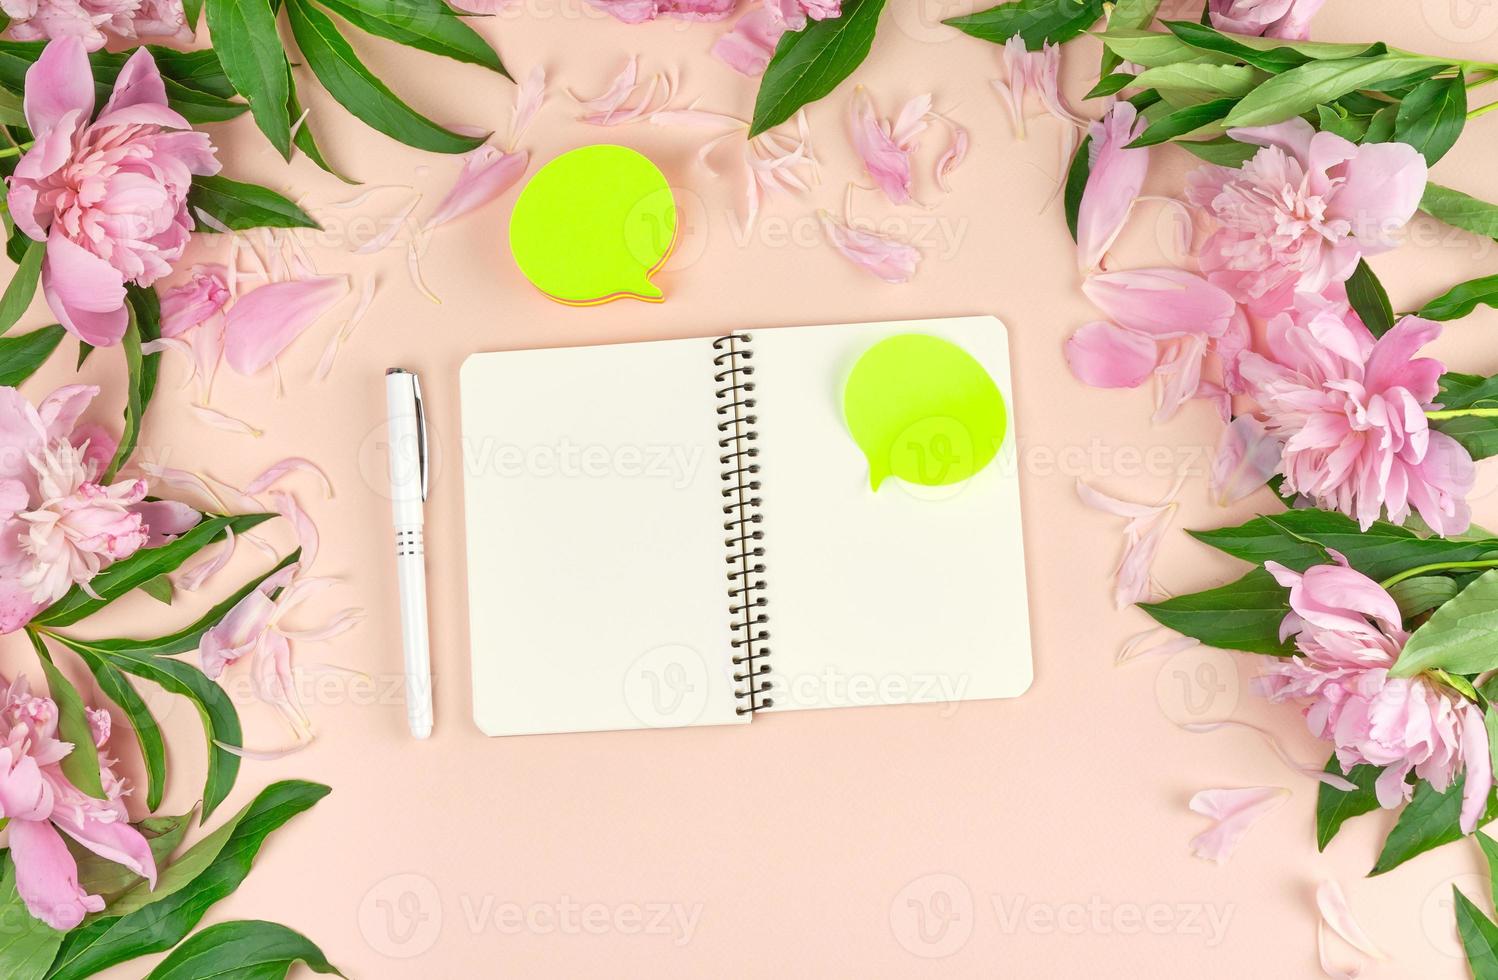 empty  paper stickers and open notebook on a peach background photo